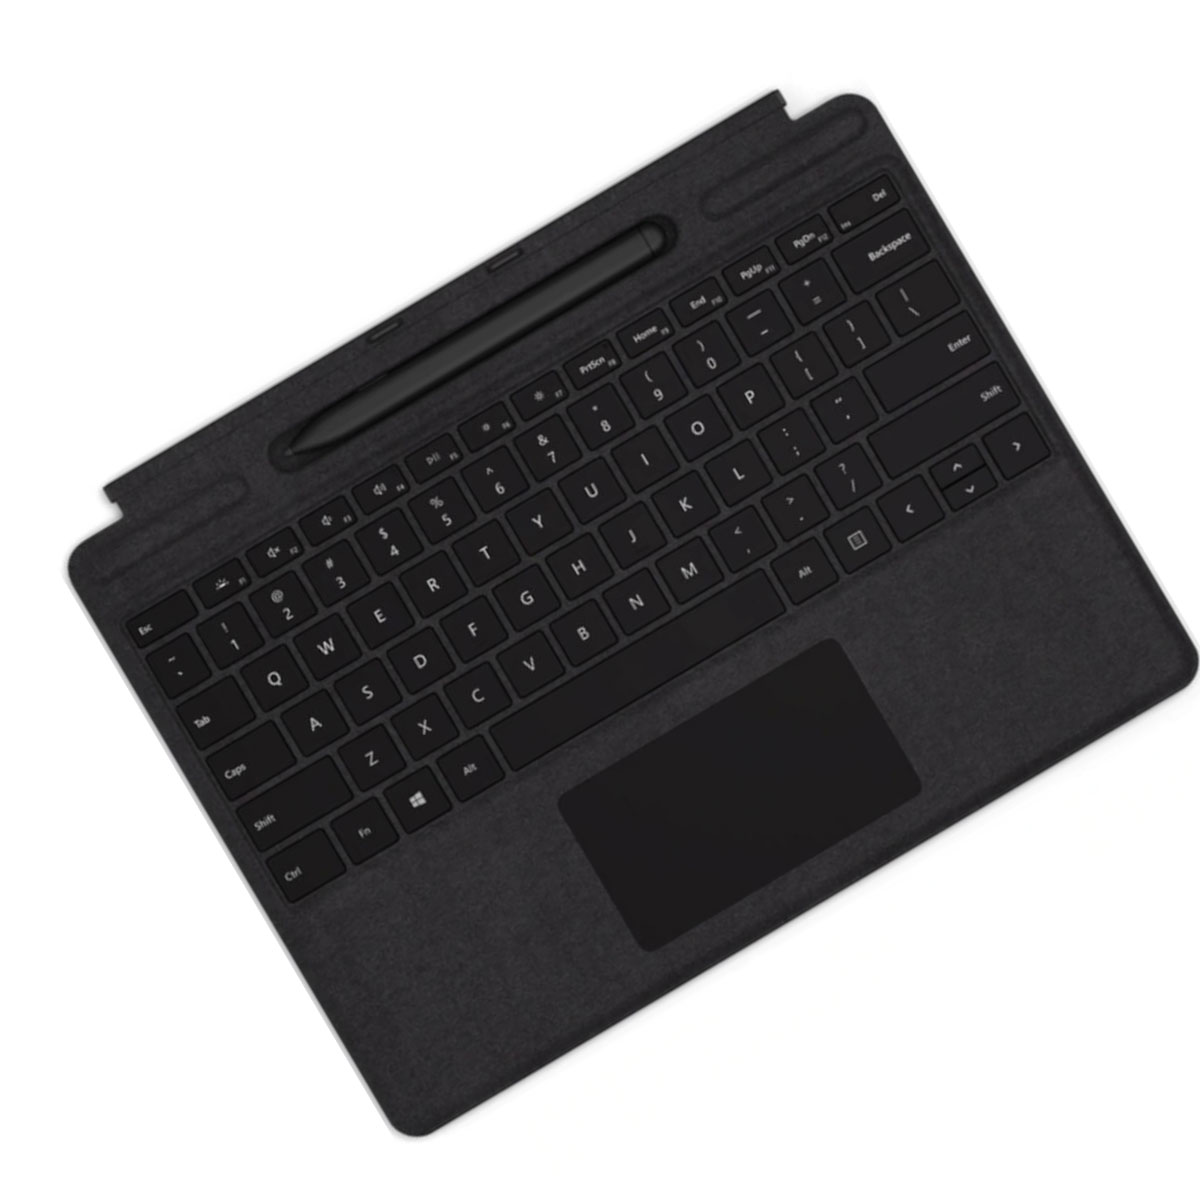 surface pro x keyboard with slim pen